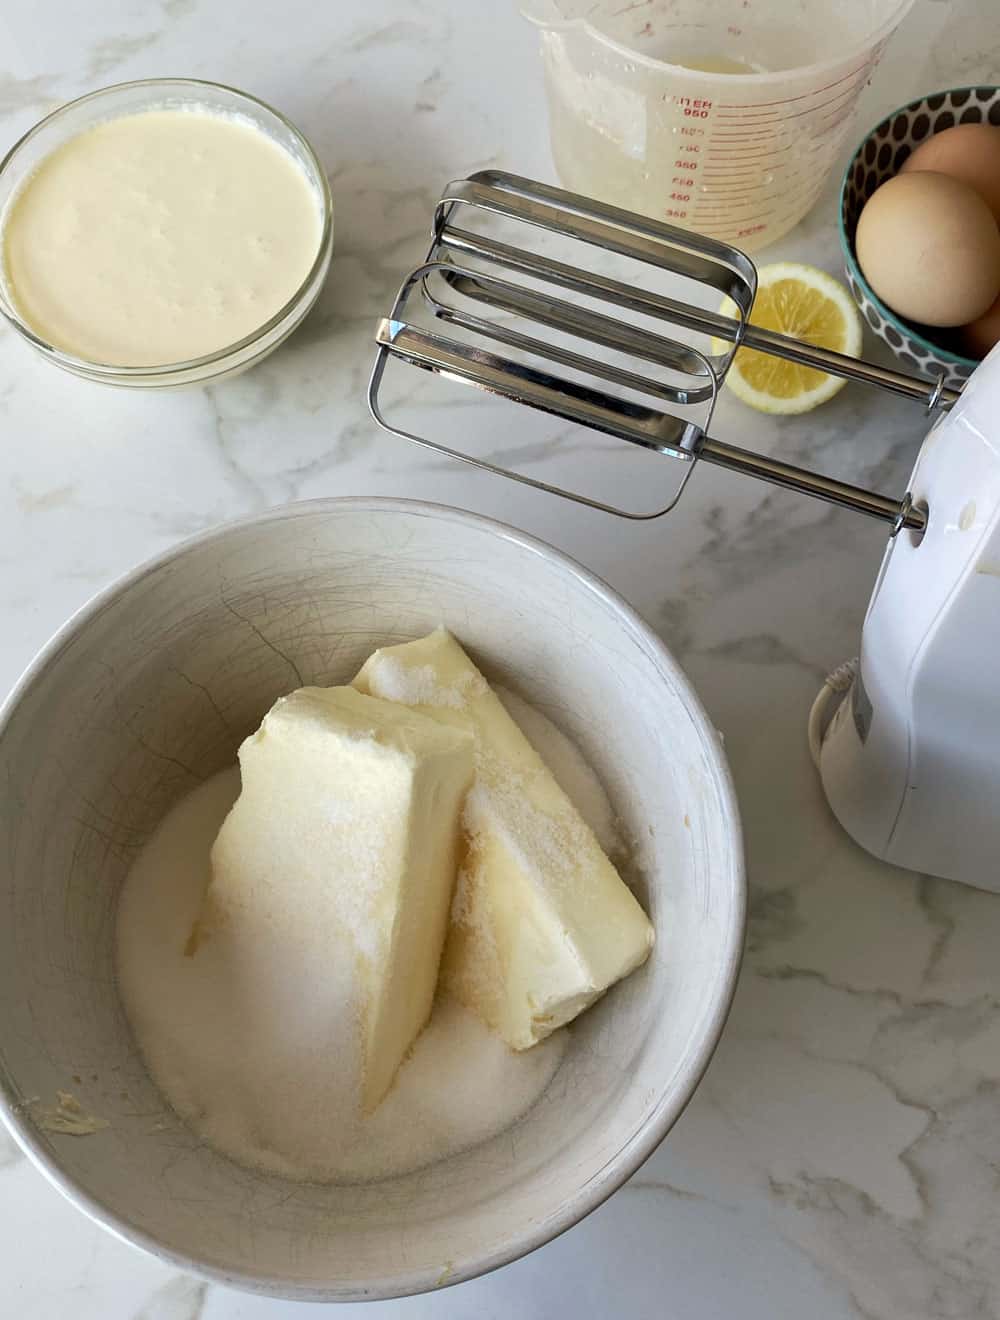 Cream cheese and sugar in a white bowl. An electric beater on its side next to the bowl with a bowl of cream, half a lemon and some eggs in the background.